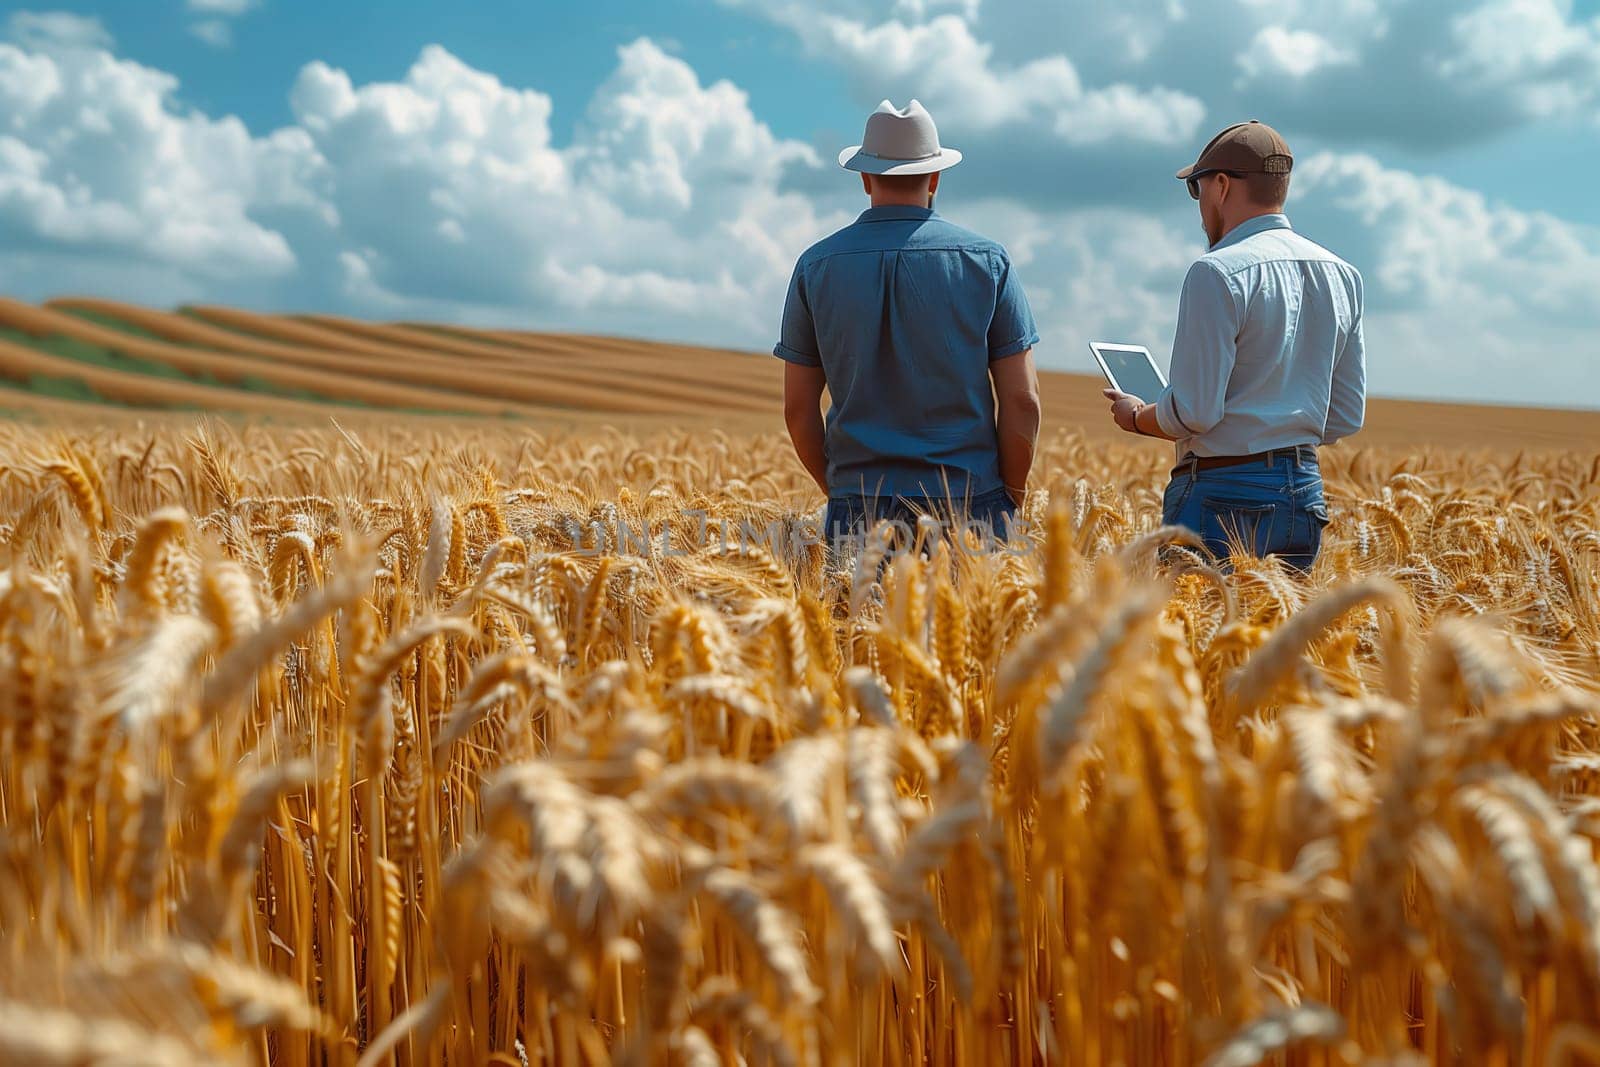 Two men in hats admire the tablet in a Khorasan wheat field under a cloudy sky by richwolf